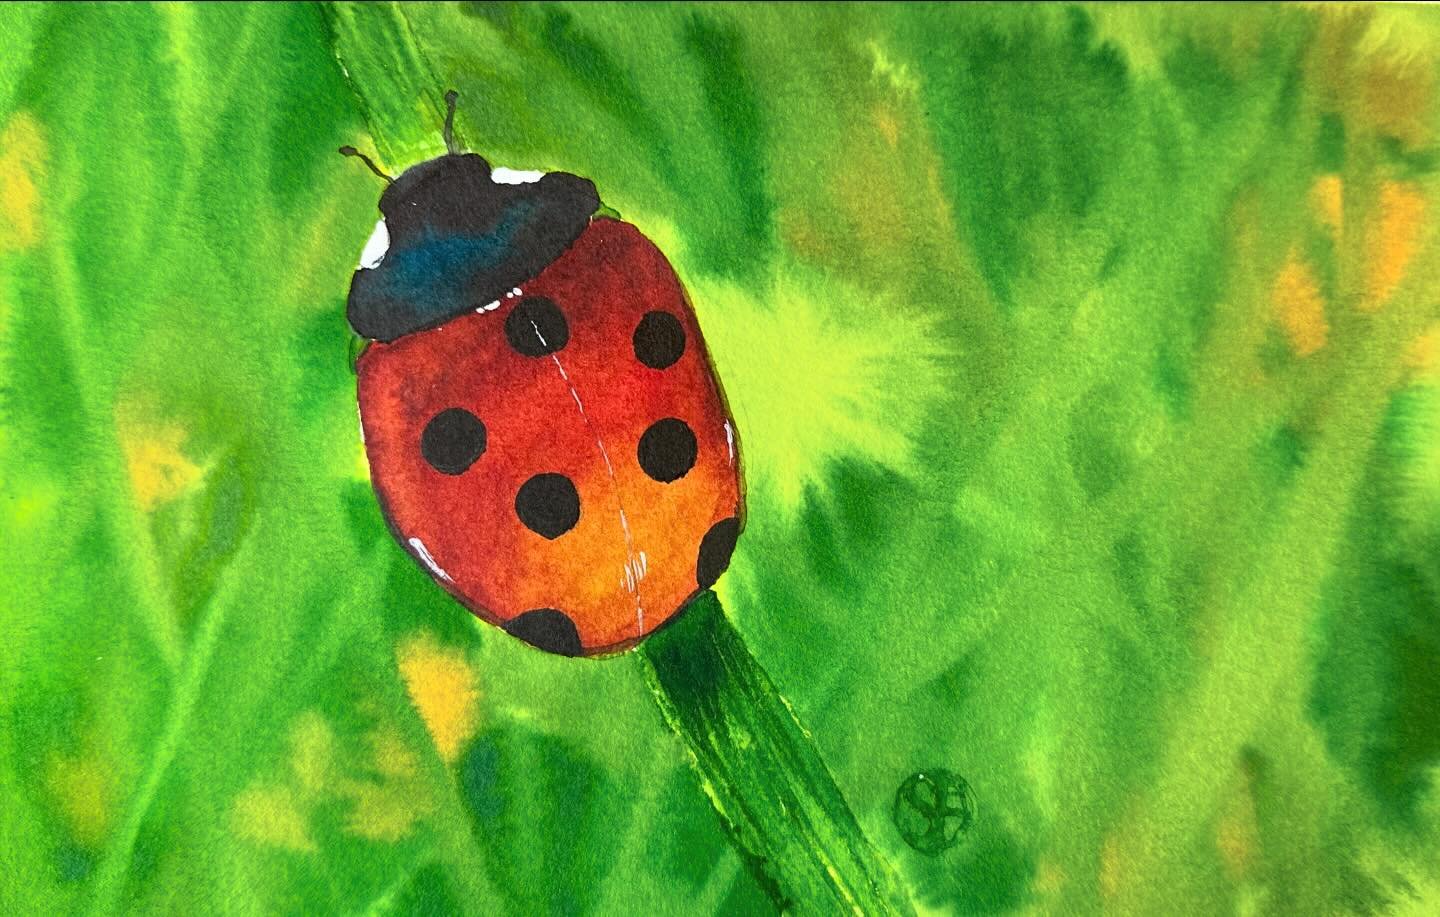 I painted this cute ladybug following @sarahdandelioncray&rsquo;s live tutorial. I love the warm colors on the ladybug and had fun putting in the grass textures in the background. 

#letsmakeartwatercolor #letsmakeart #watercolor #watercolorpainting